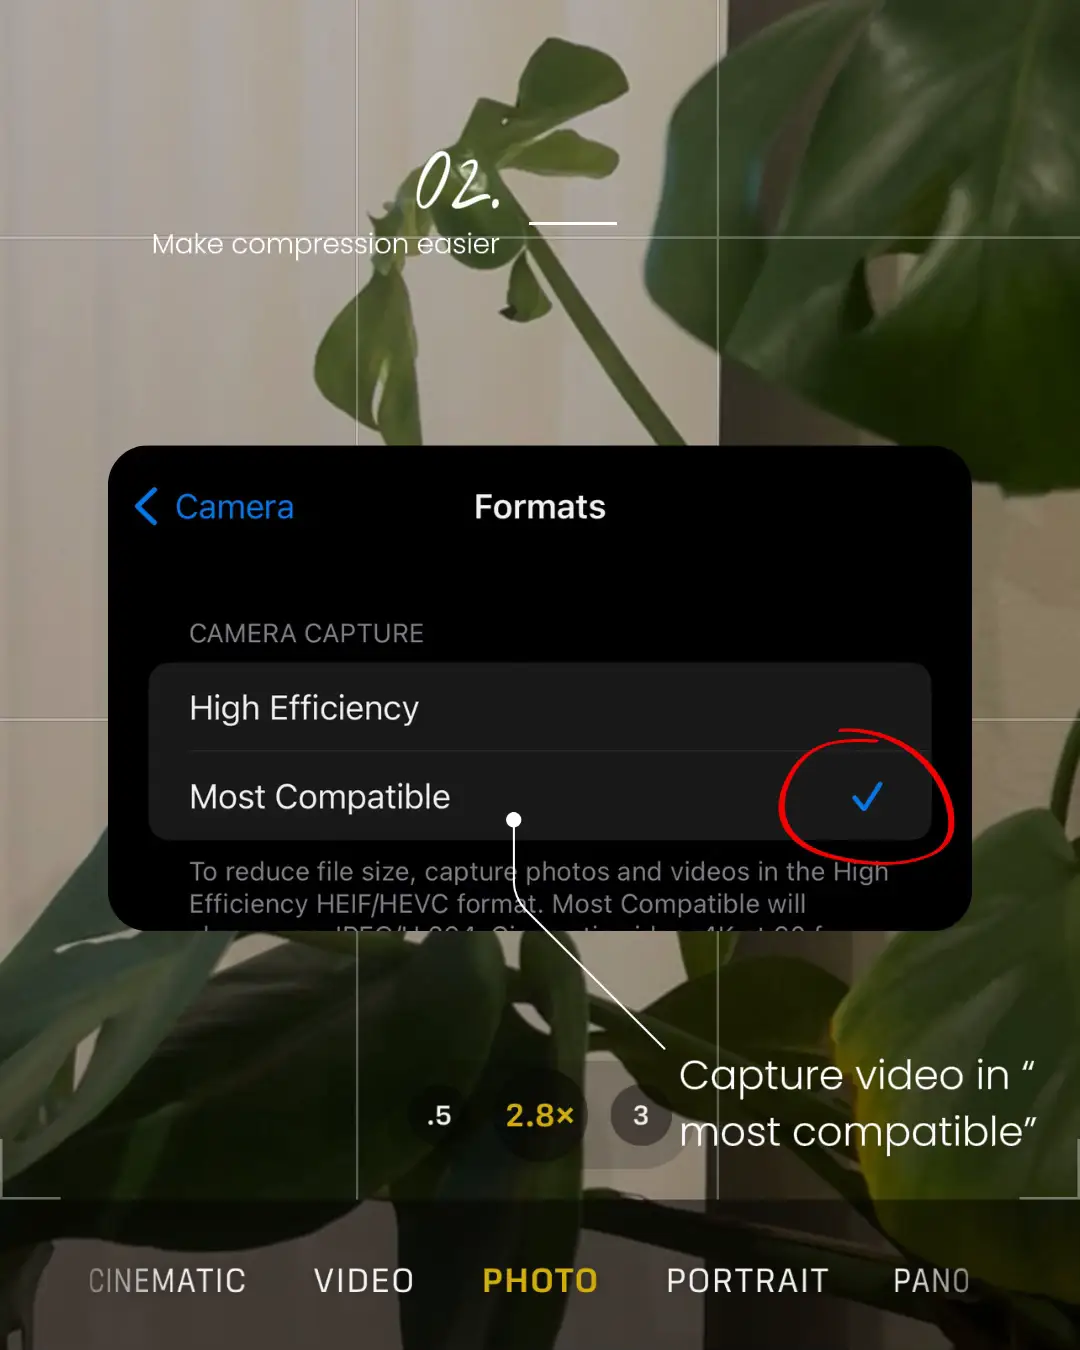  A screen showing camera formats for a photo and video.